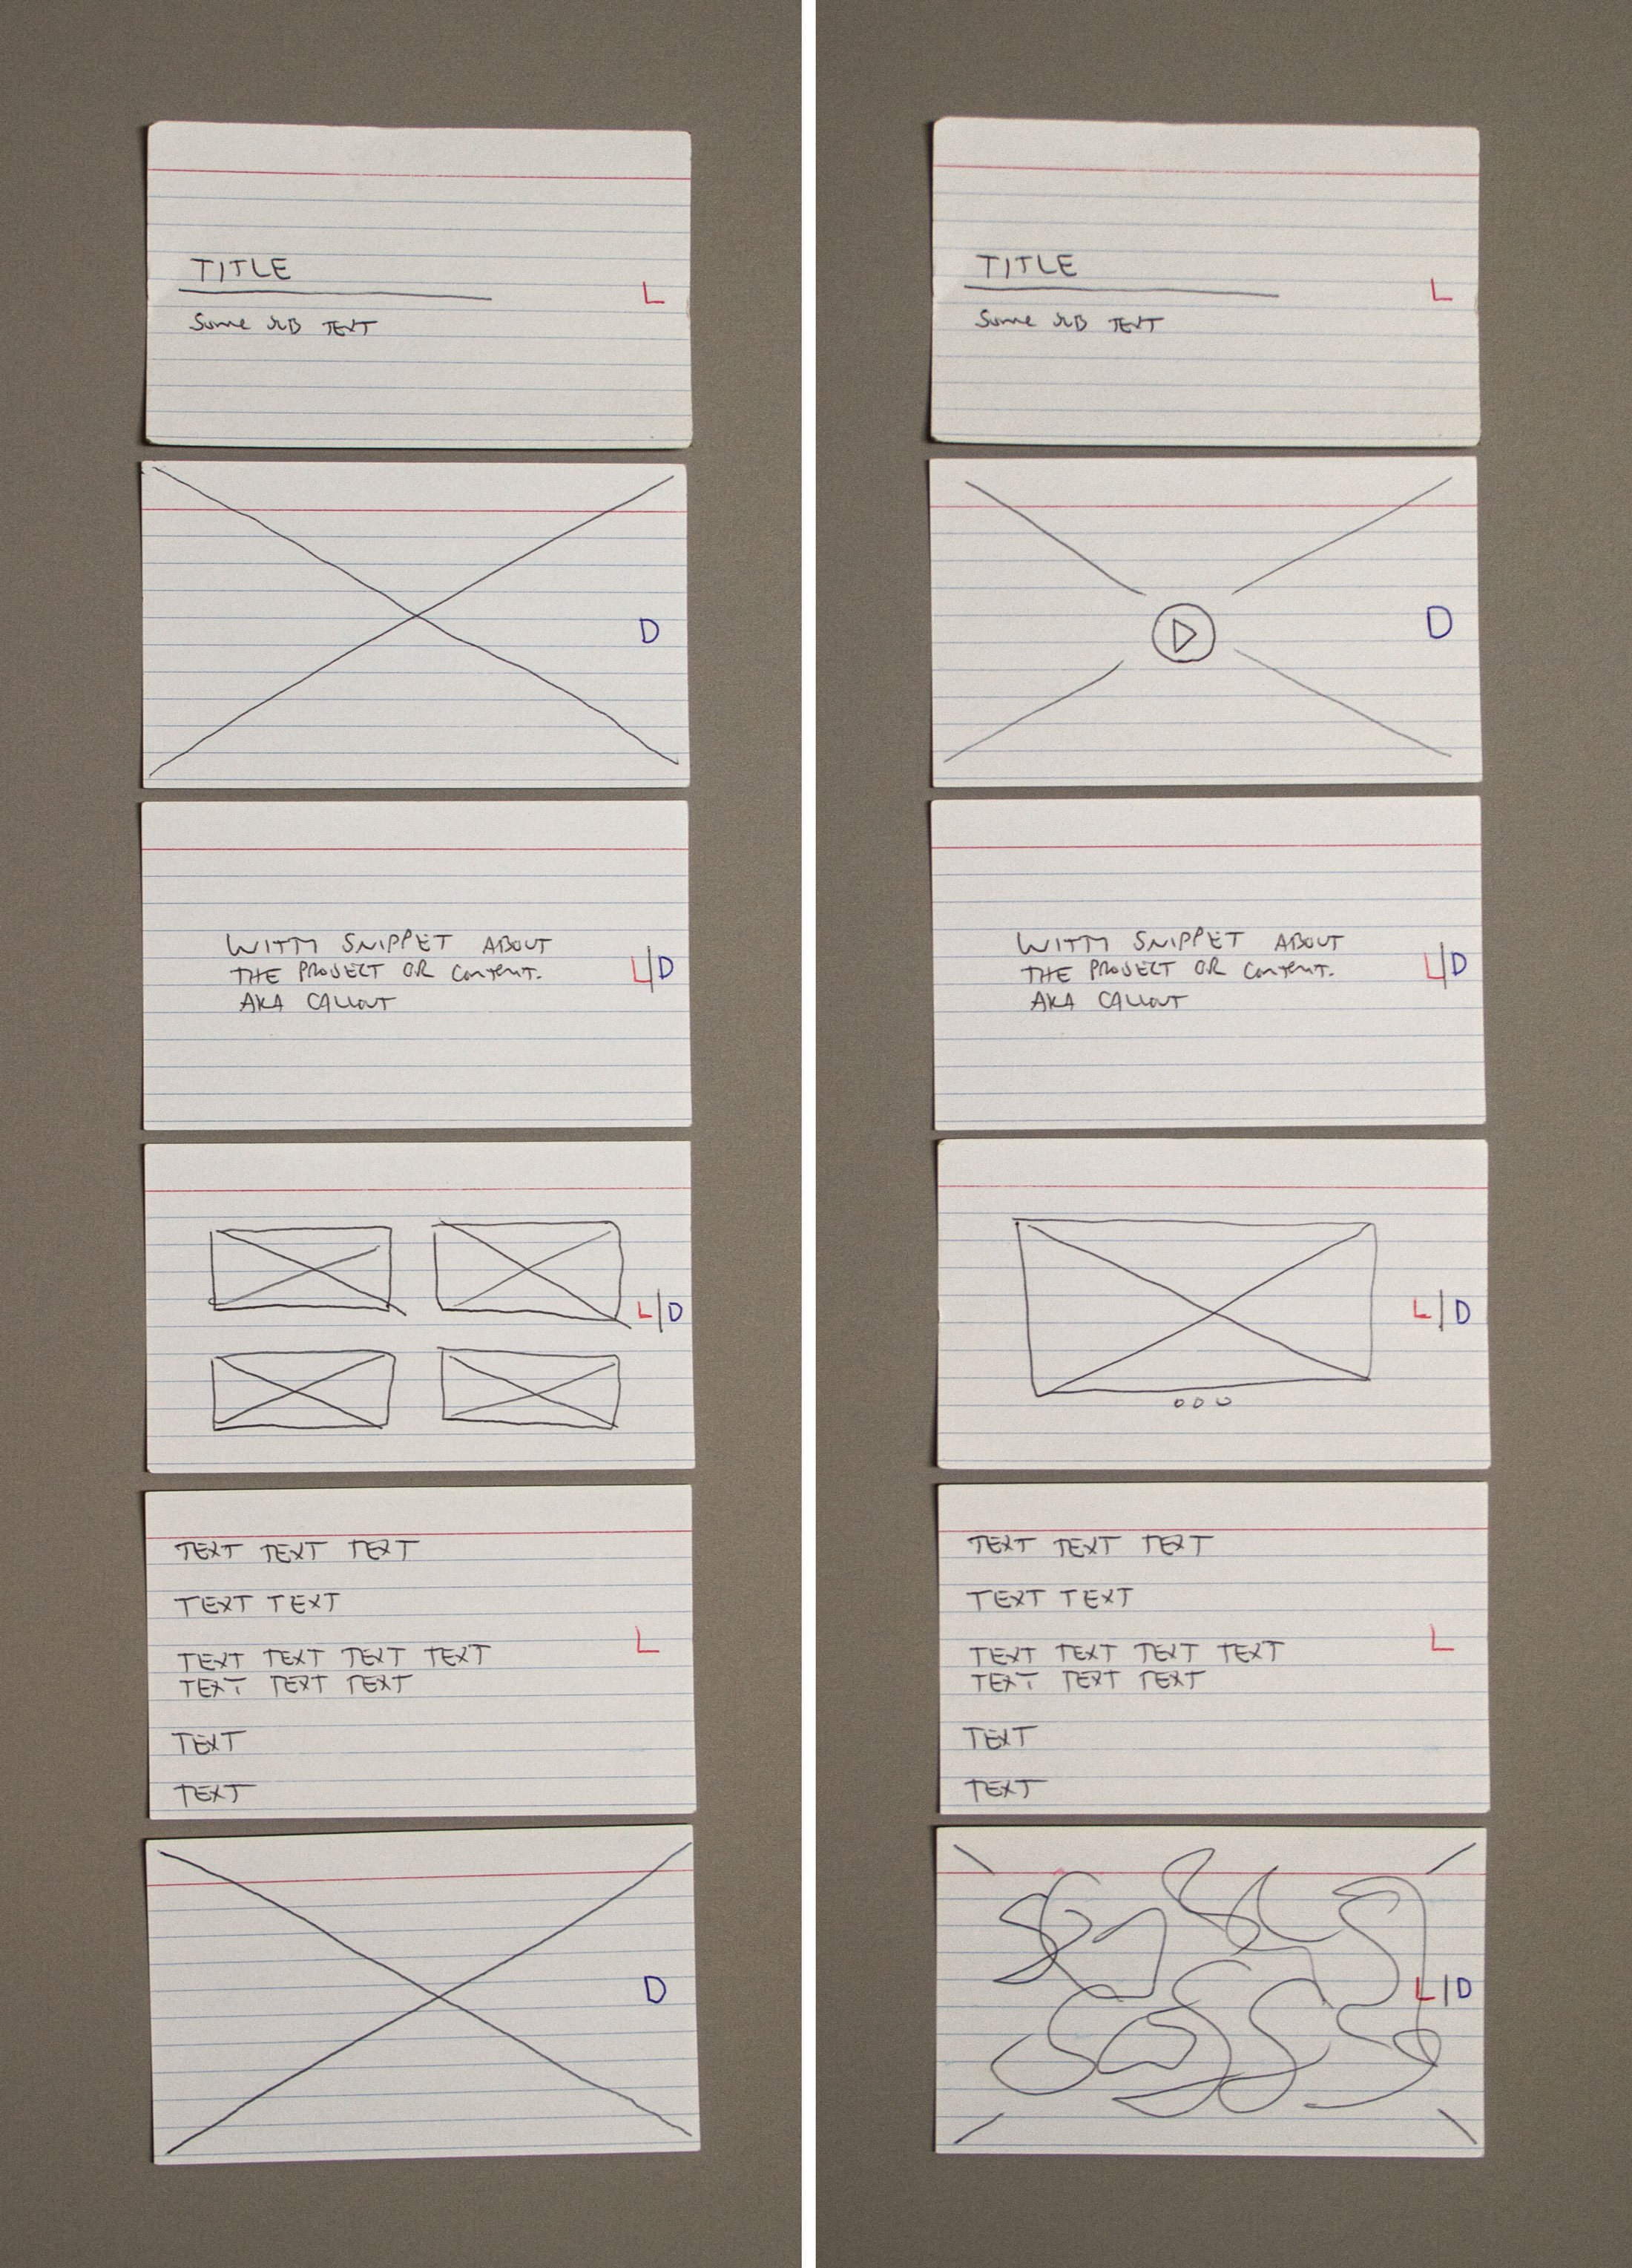 The index card version of the Wireframe Diagram used in the making of sethakkerman.com.